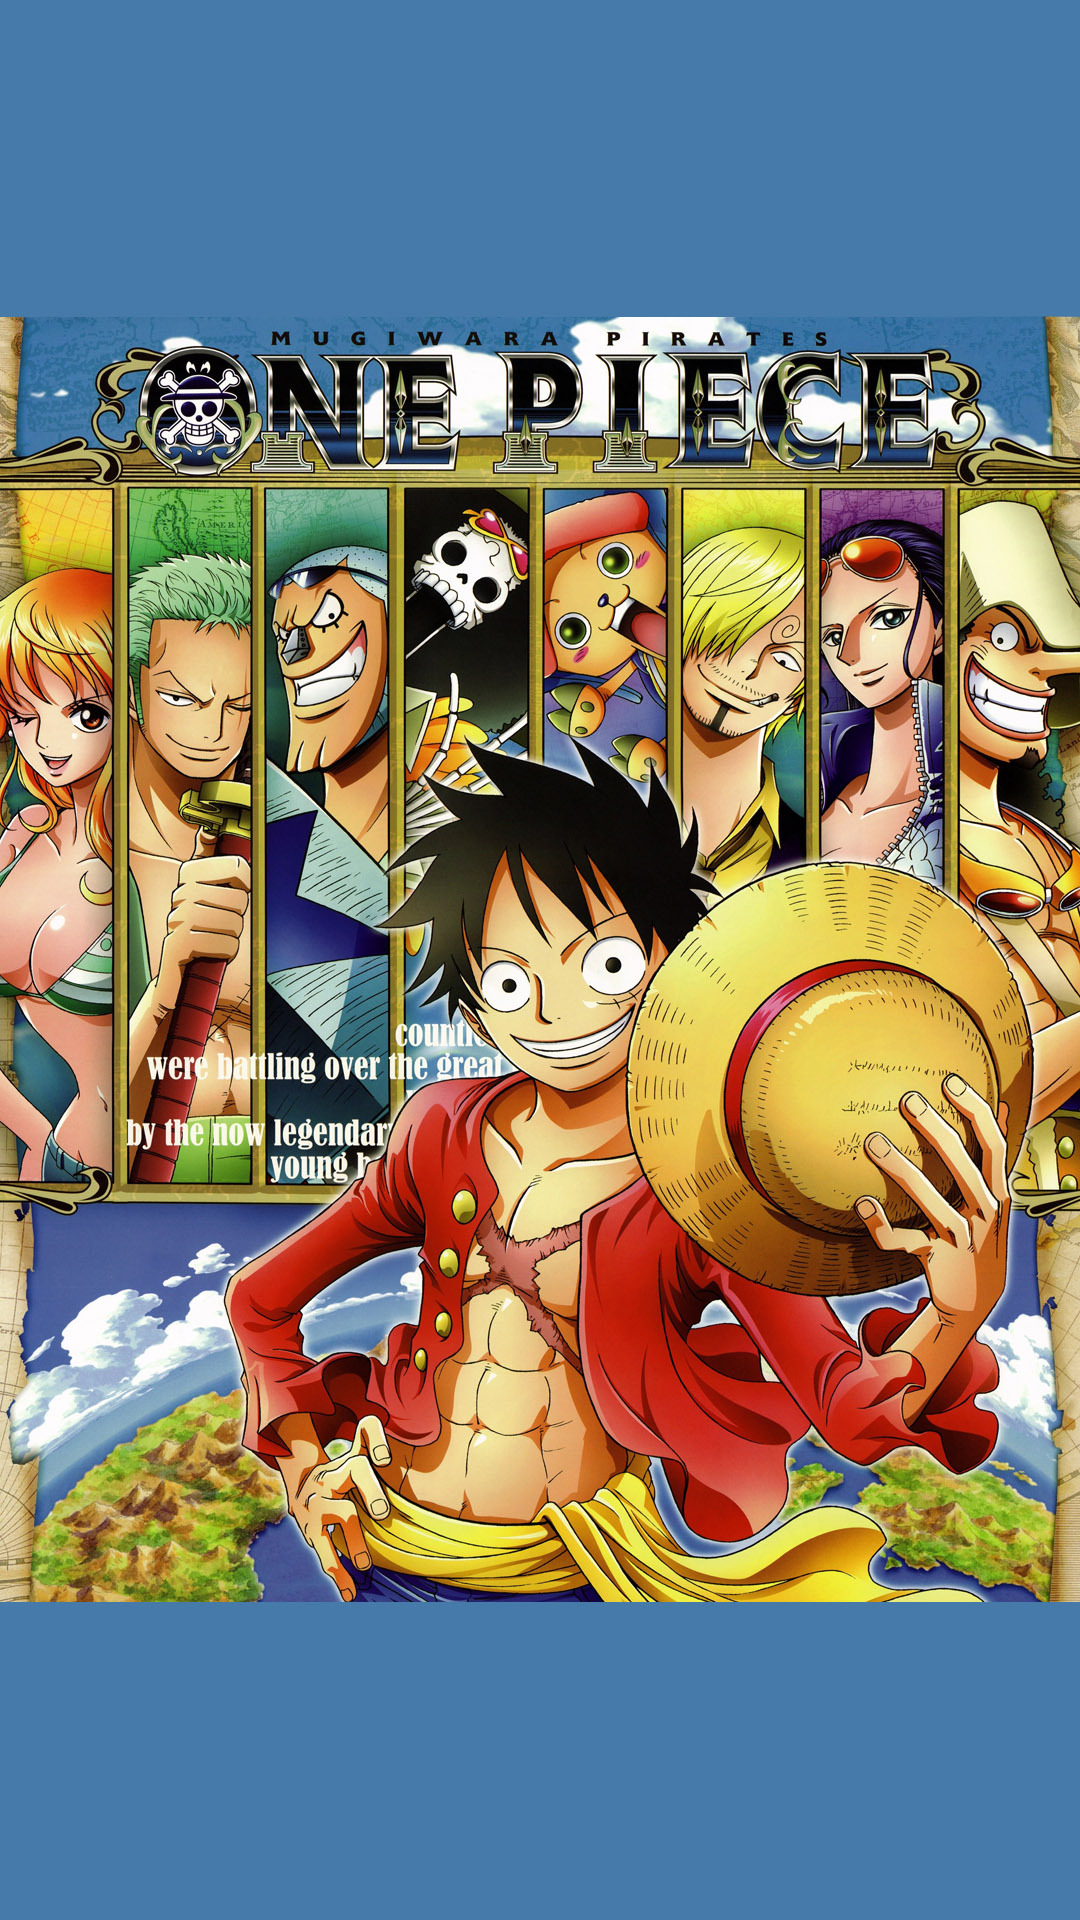 Free Download 268one Piece Iphone6plus 1080x19 For Your Desktop Mobile Tablet Explore 74 One Piece Phone Wallpaper One Piece Epic Wallpaper One Piece Iphone Wallpaper One Piece Anime Wallpapers